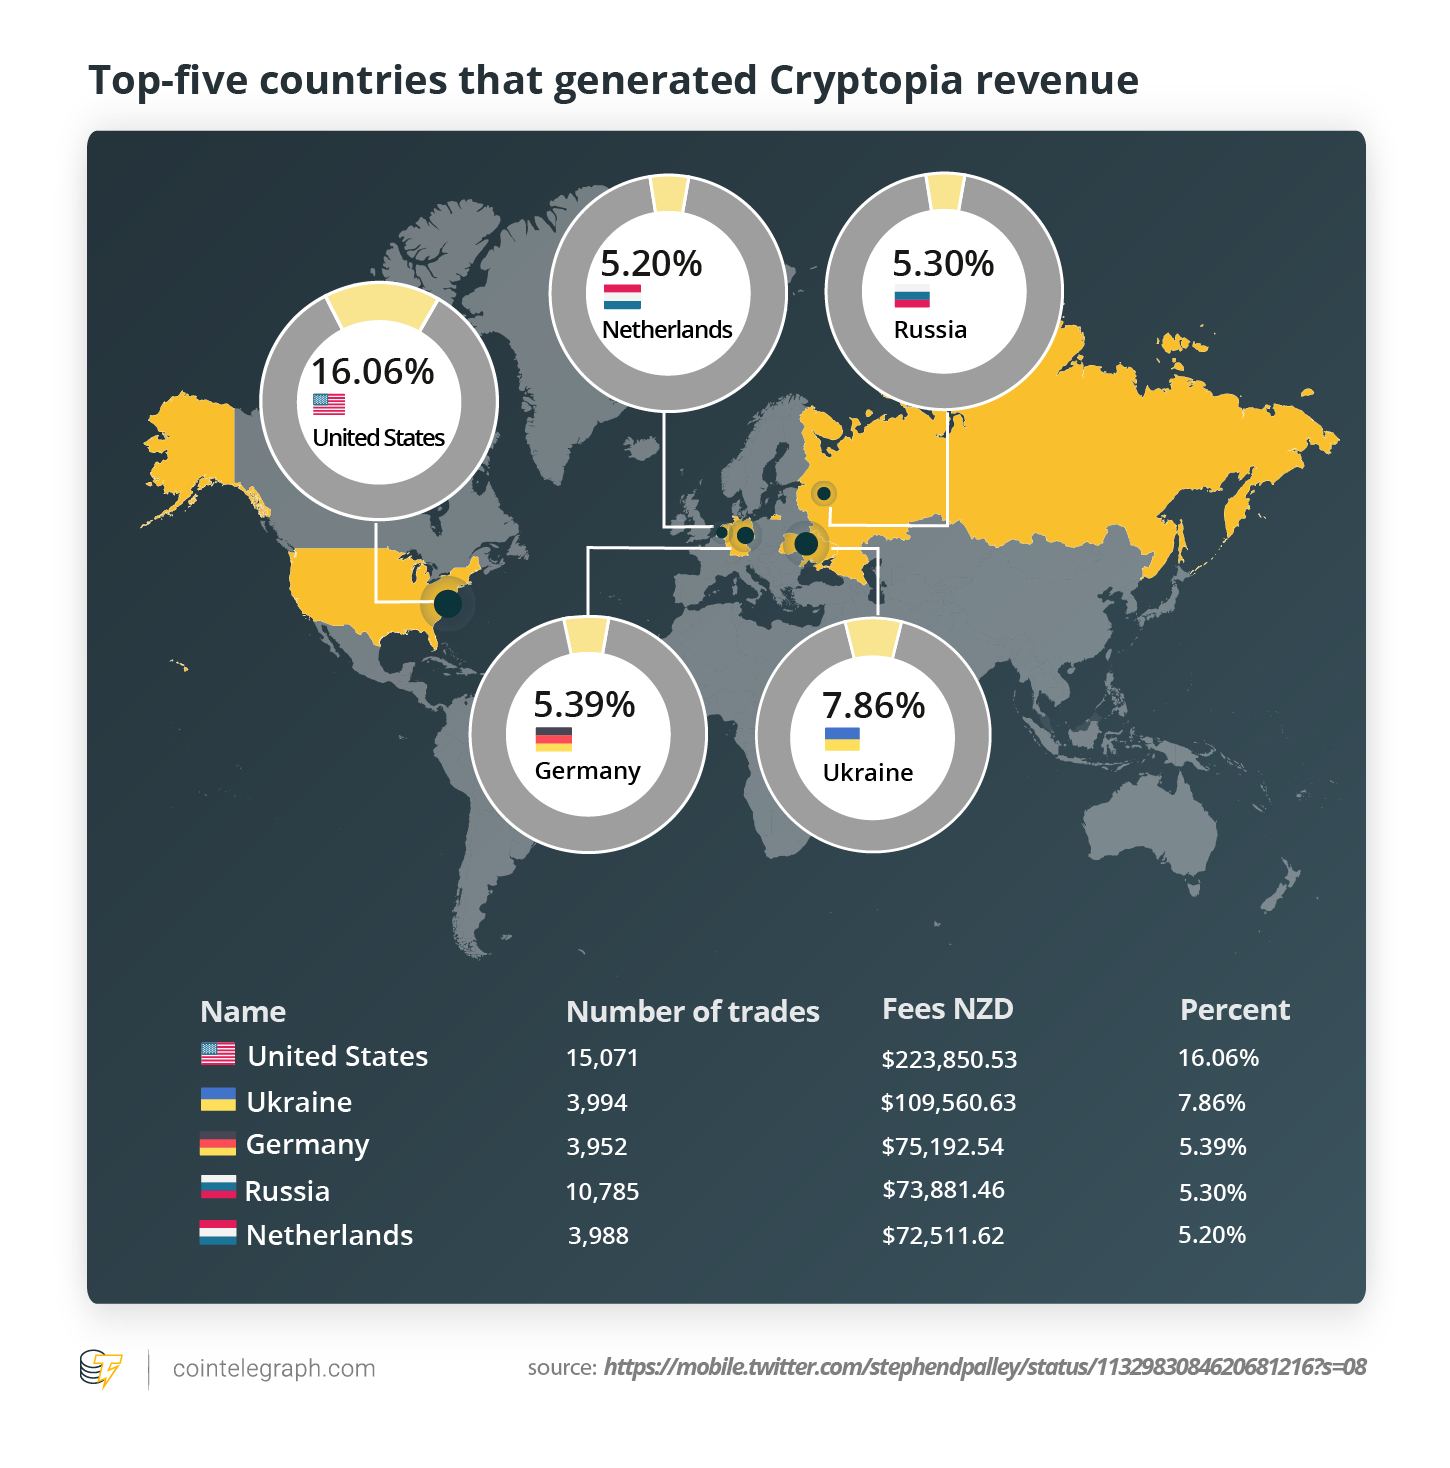 Top-five countries that generated Cryptopia revenue